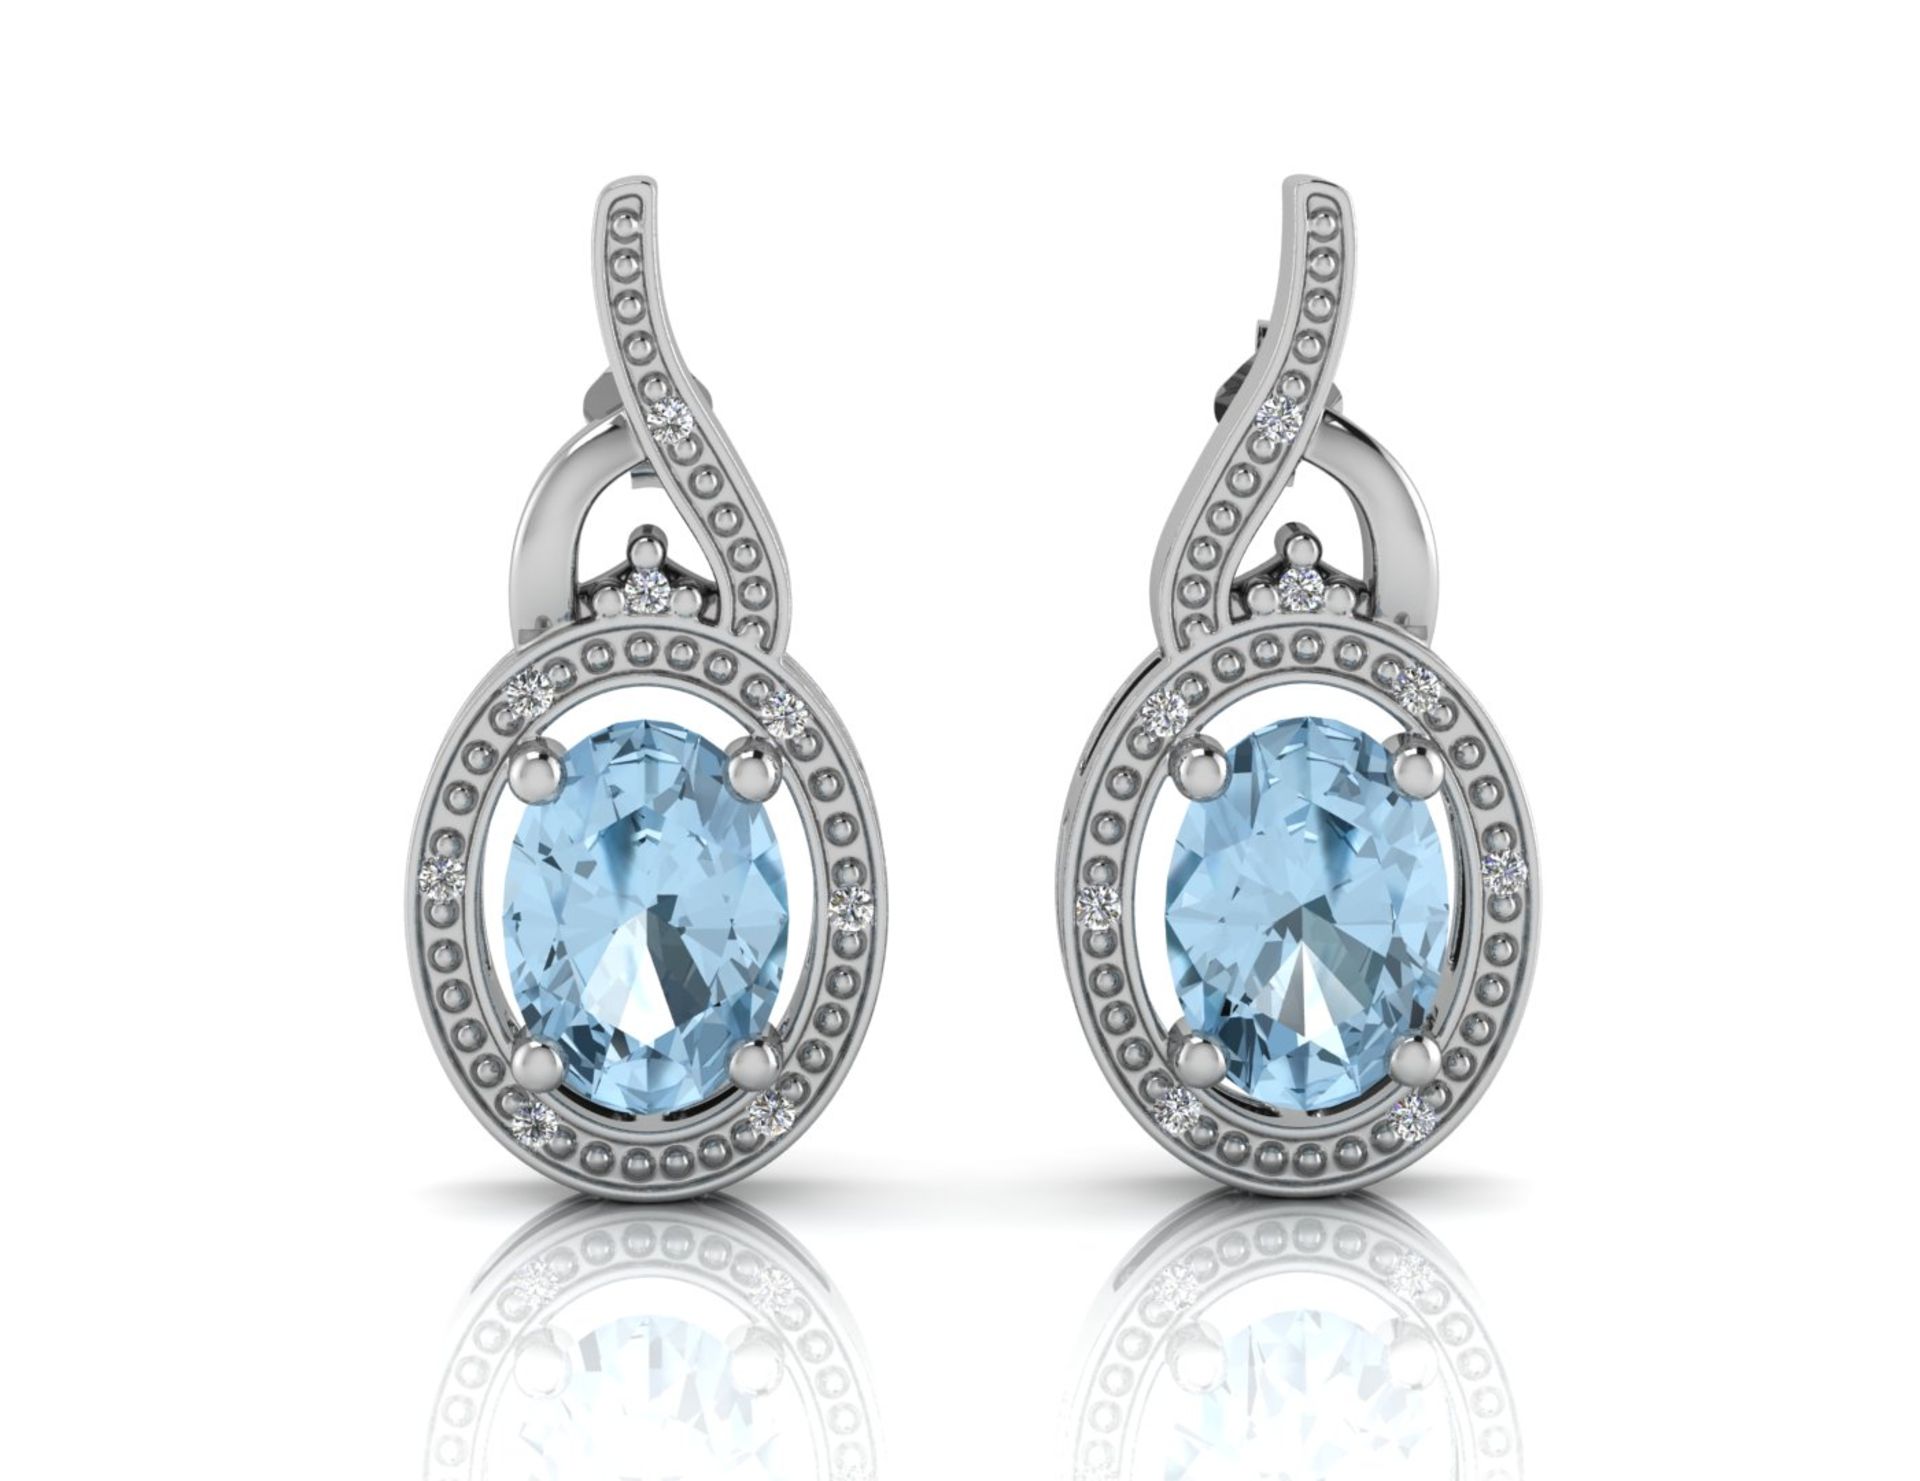 9ct White Gold Diamond And Blue Topaz Earring 0.05 Carats - Valued by GIE £2,195.00 - A beautiful - Image 3 of 5